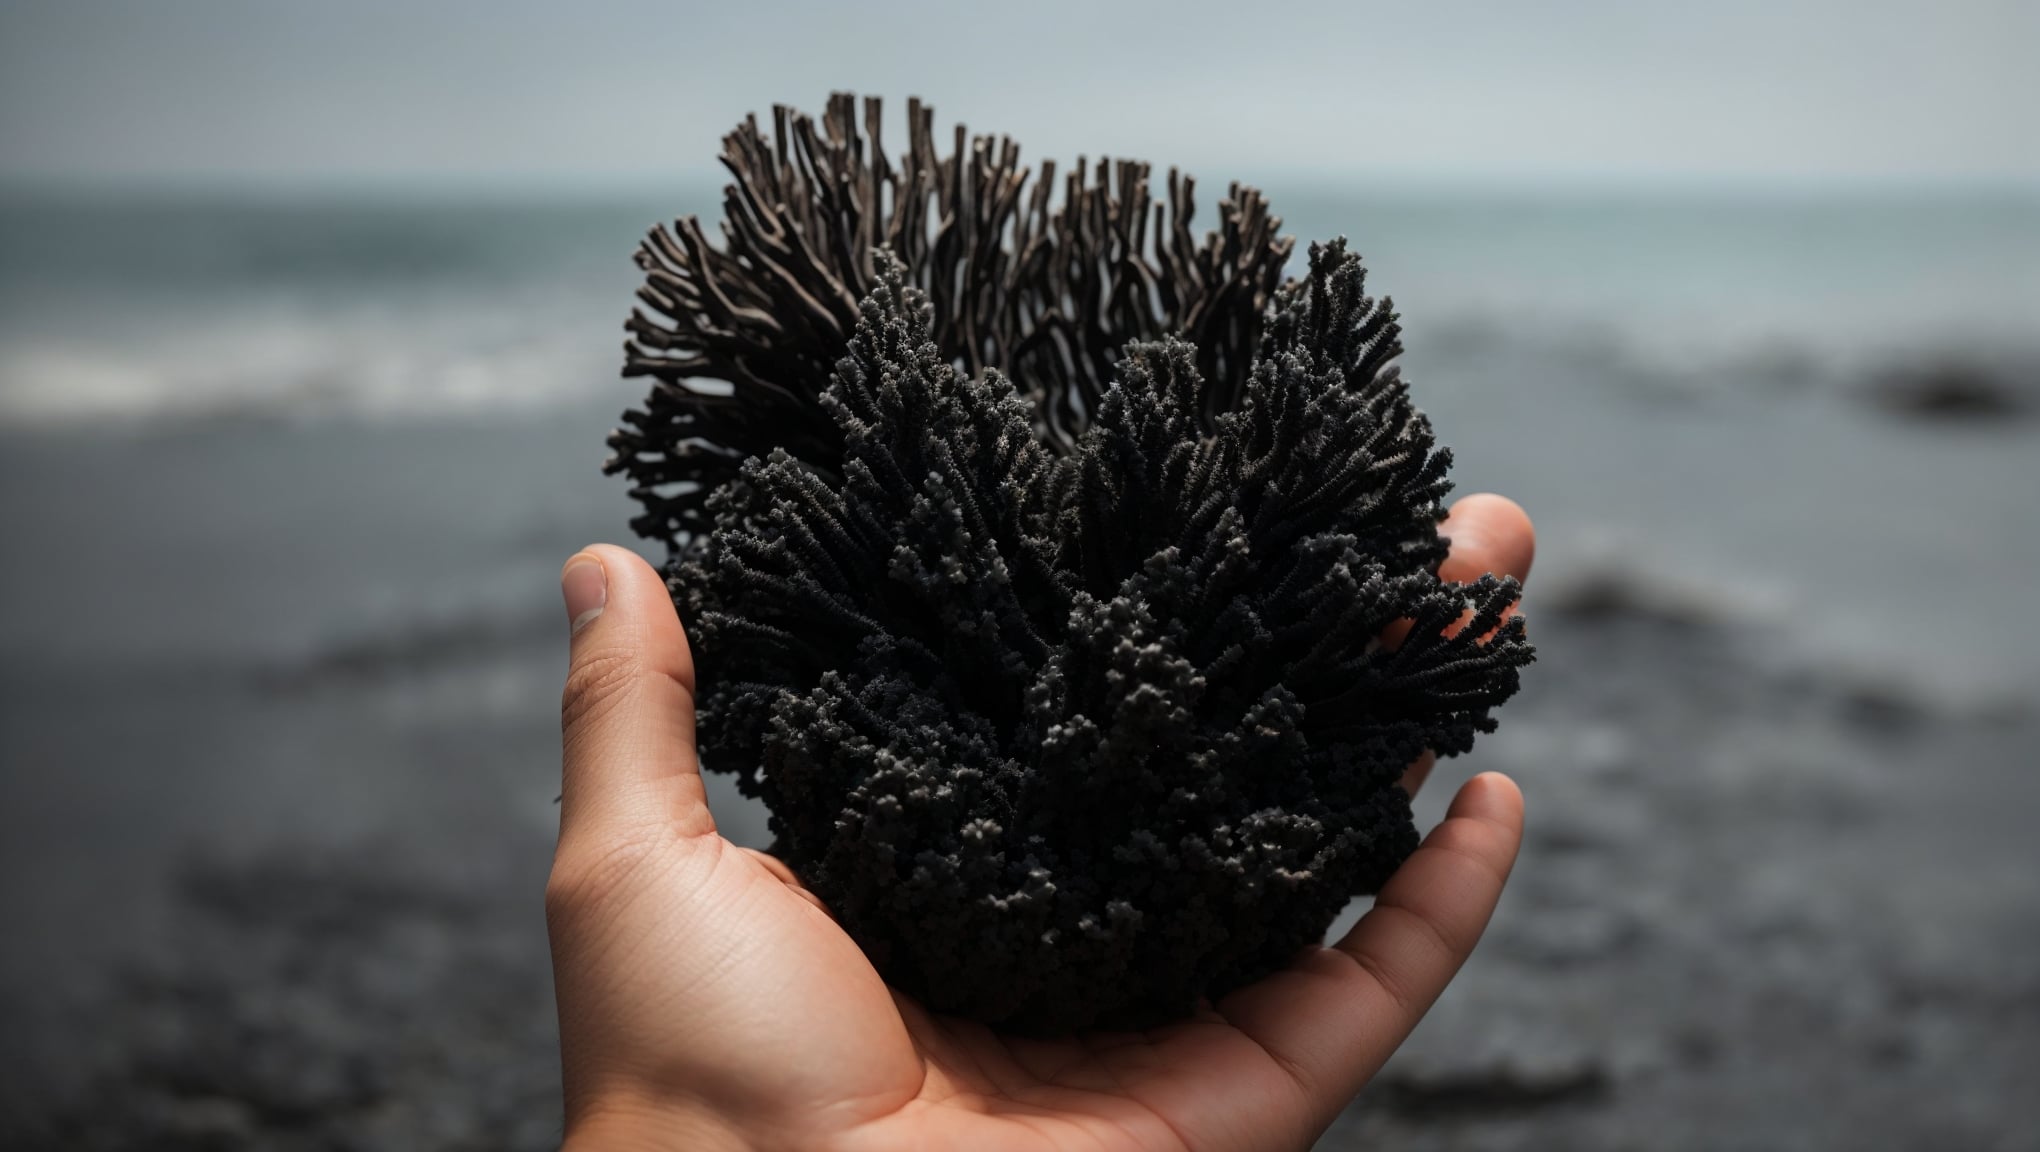 Absorbing the potent black coral properties by holding it in the hand.